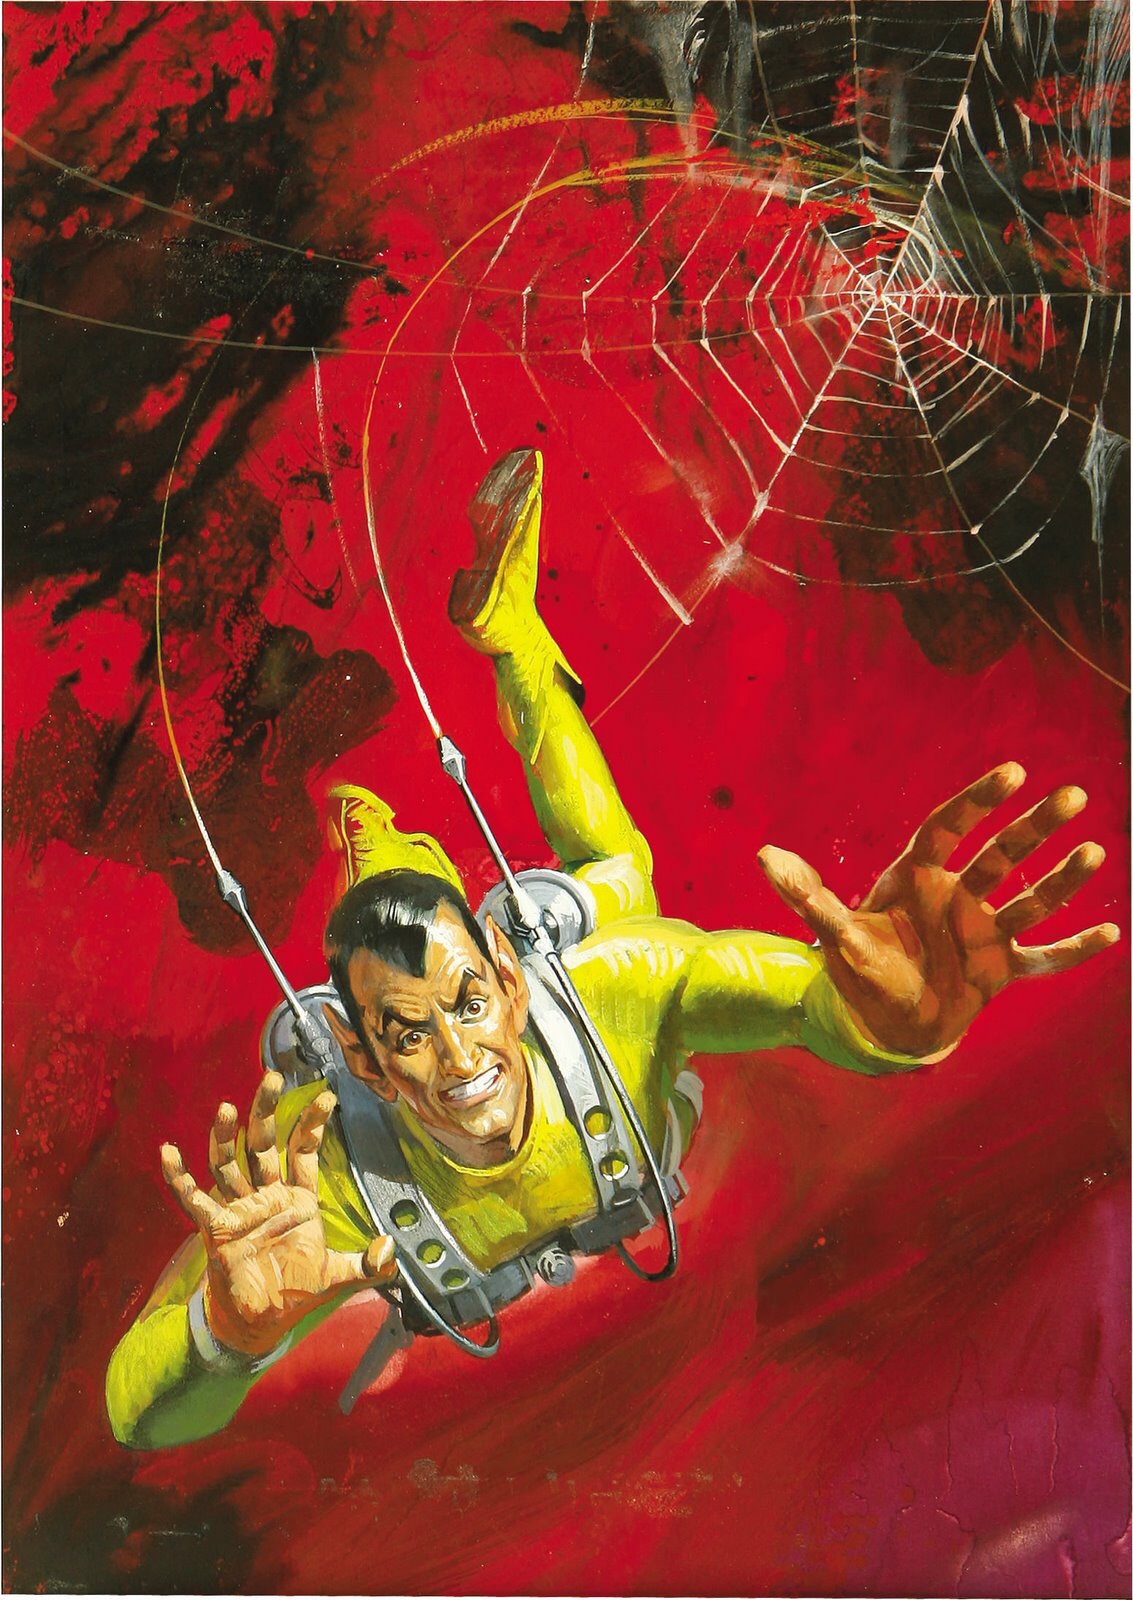 The Spider as featured on the cover of Fleetway Super Library Fantastic Series no. 2 (January 1967). Art by Alessandro Biffignandi. Via Bear Alley